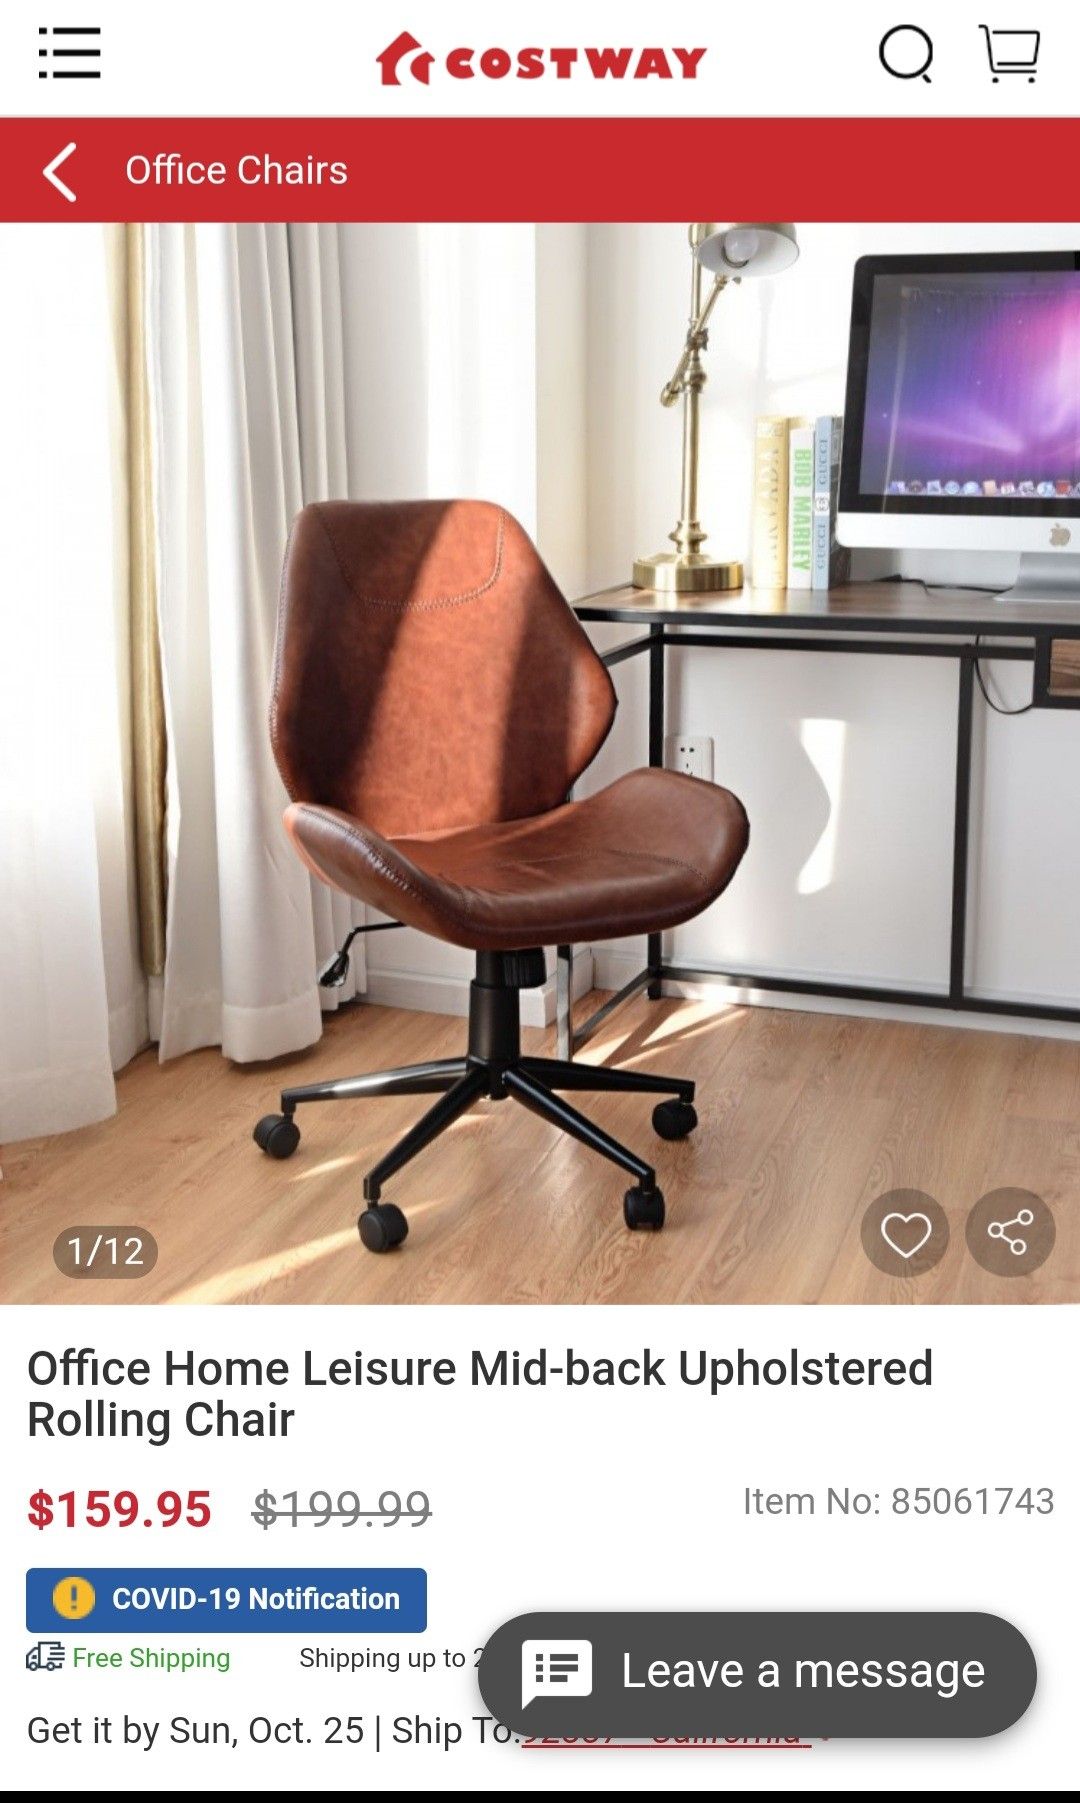 Brown PU Leather Office Chair - Costway!